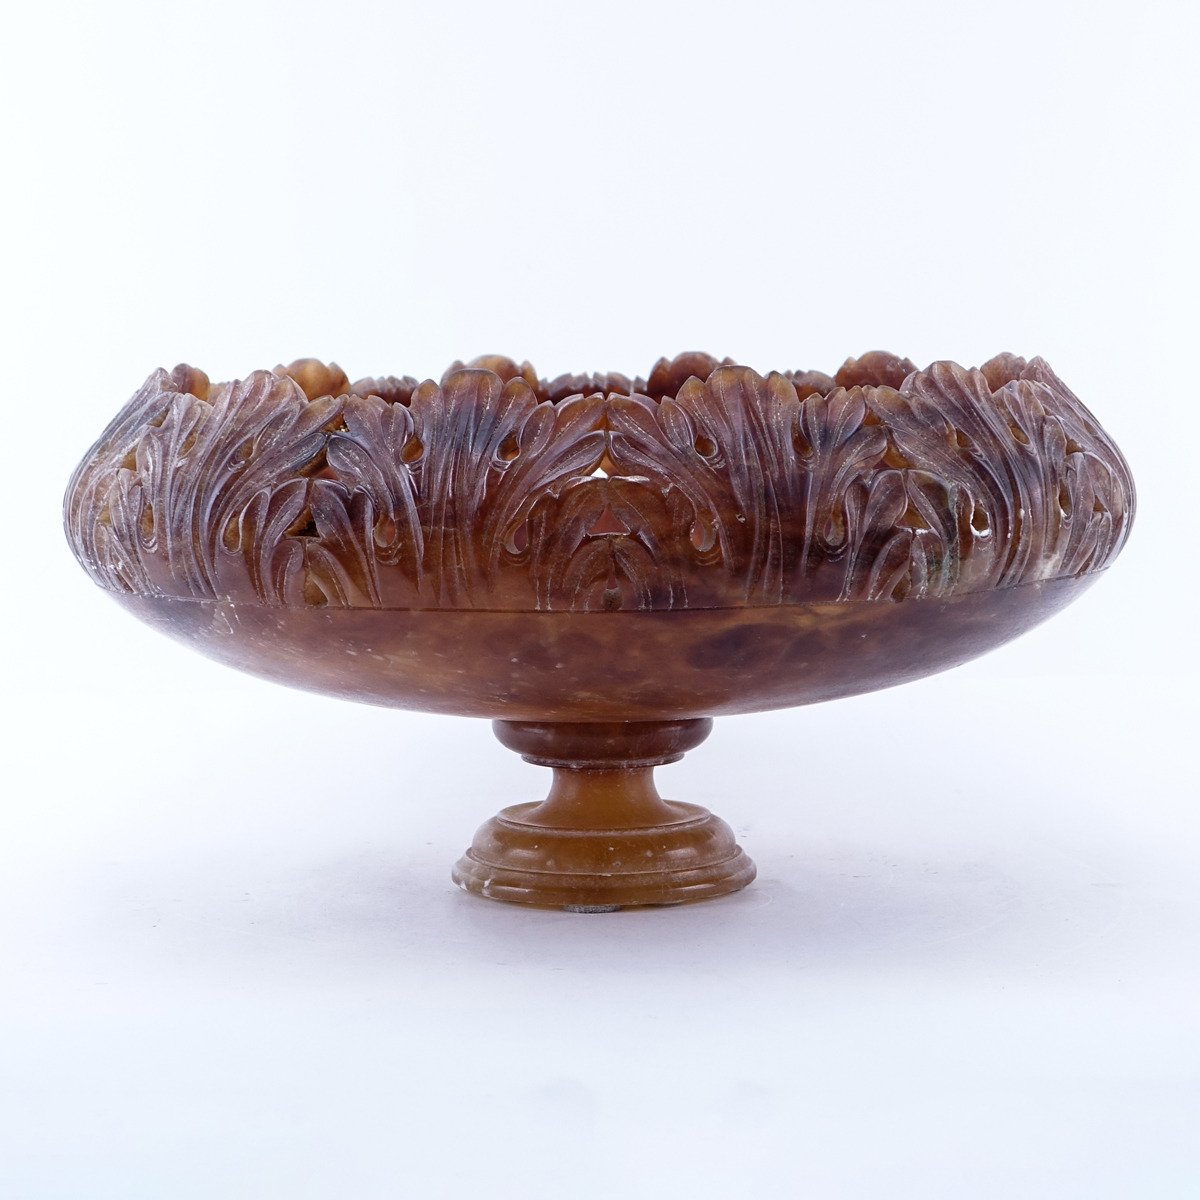 Large Carved Alabaster Footed Centerpiece Bowl.  Good condition.